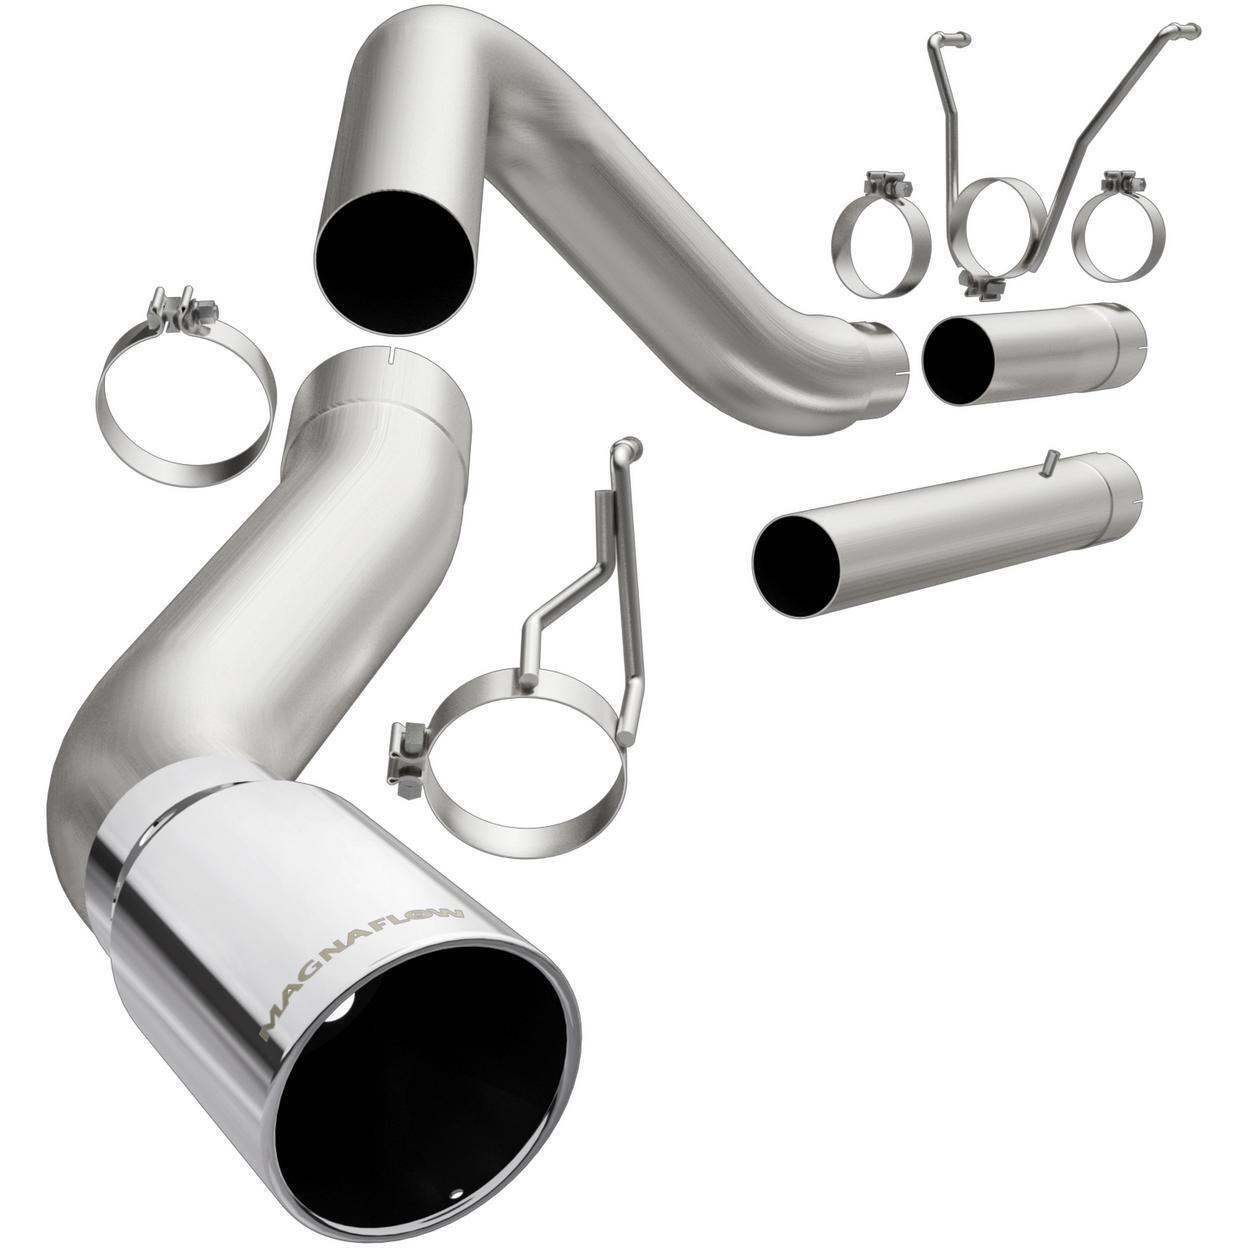 MagnaFlow 17874-CG Exhaust System Kit for 2017-2018 Ram 3500